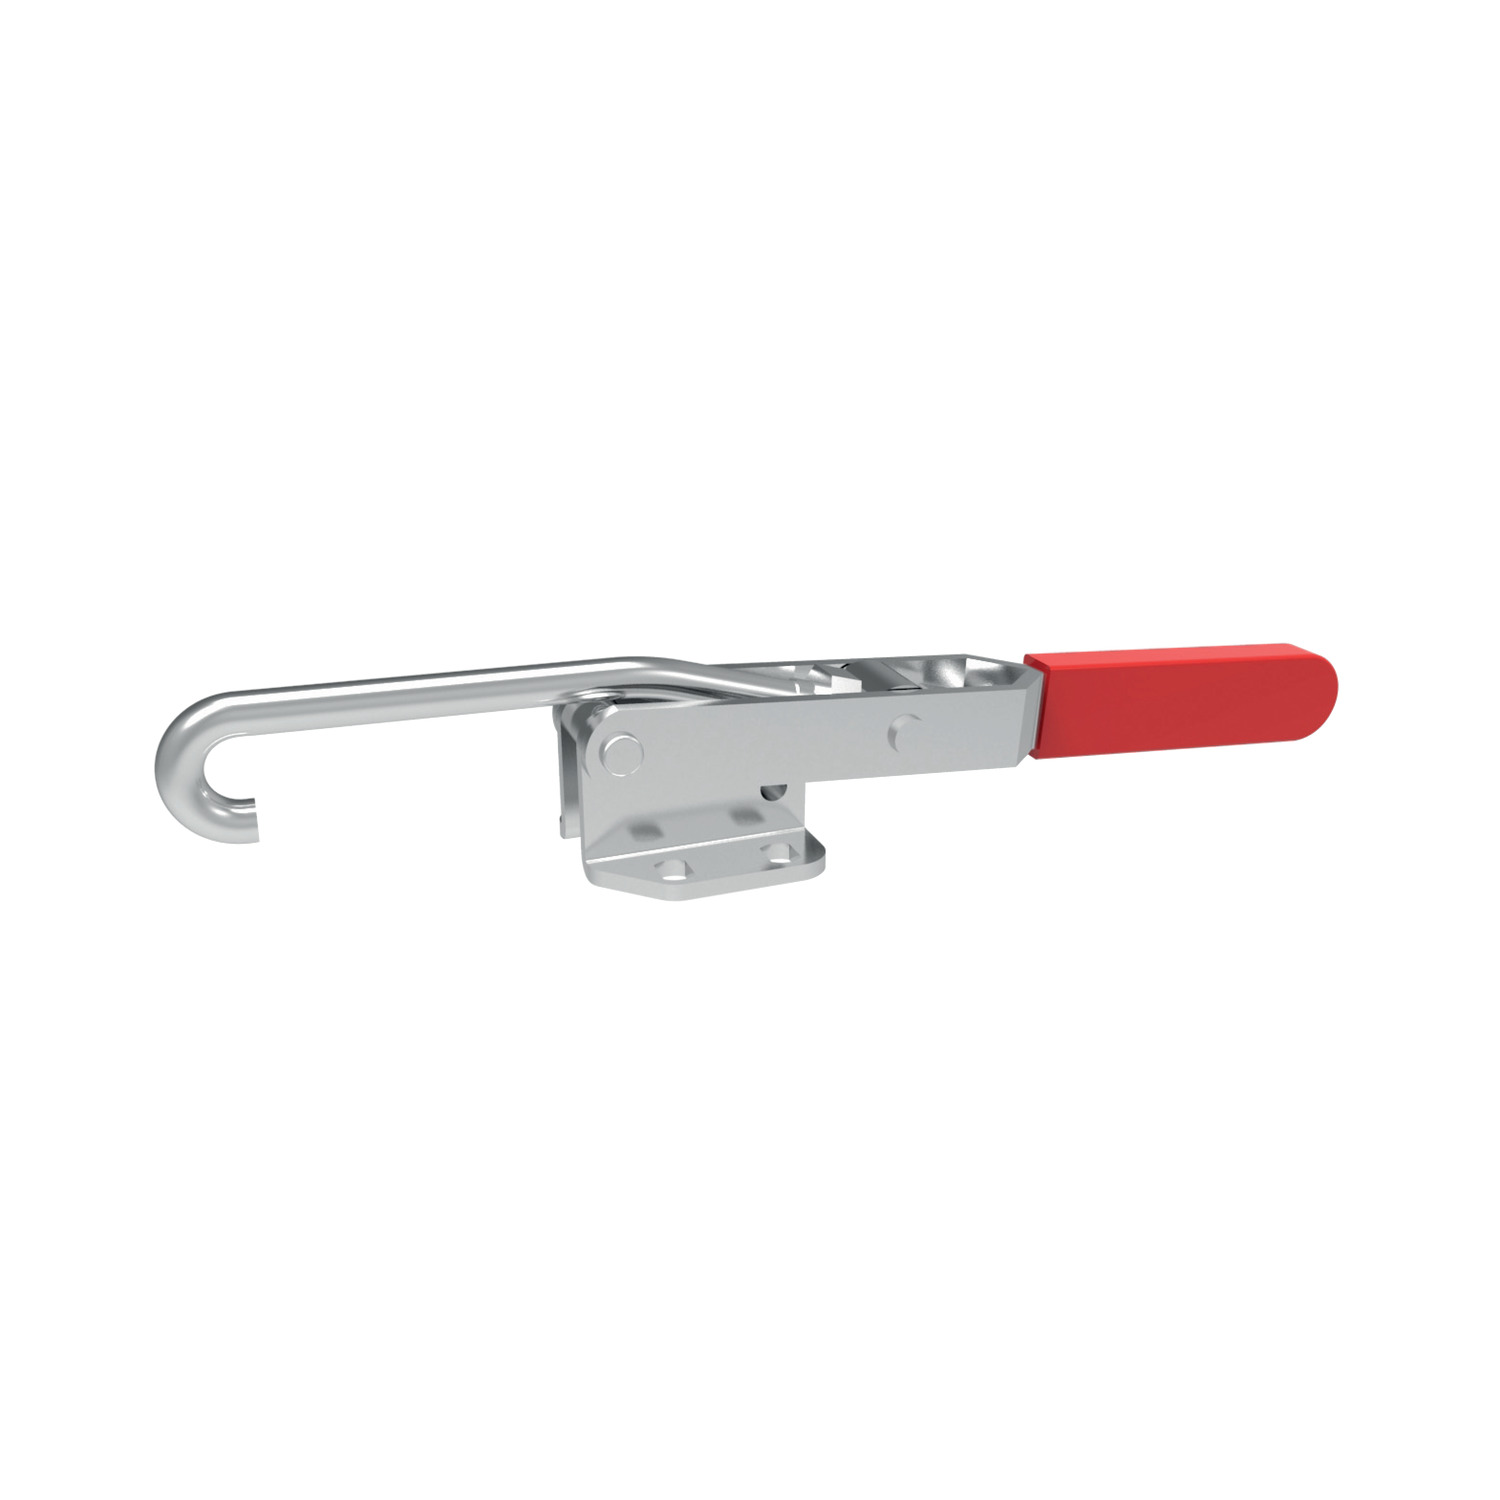 Steel Hook Type Toggle Clamps Hook type toggle clamps made from zinc plated and passivated steel or stainless steel. Their easily actuated handles are made from grease resistant plastic. Fixed catches are available seperately.